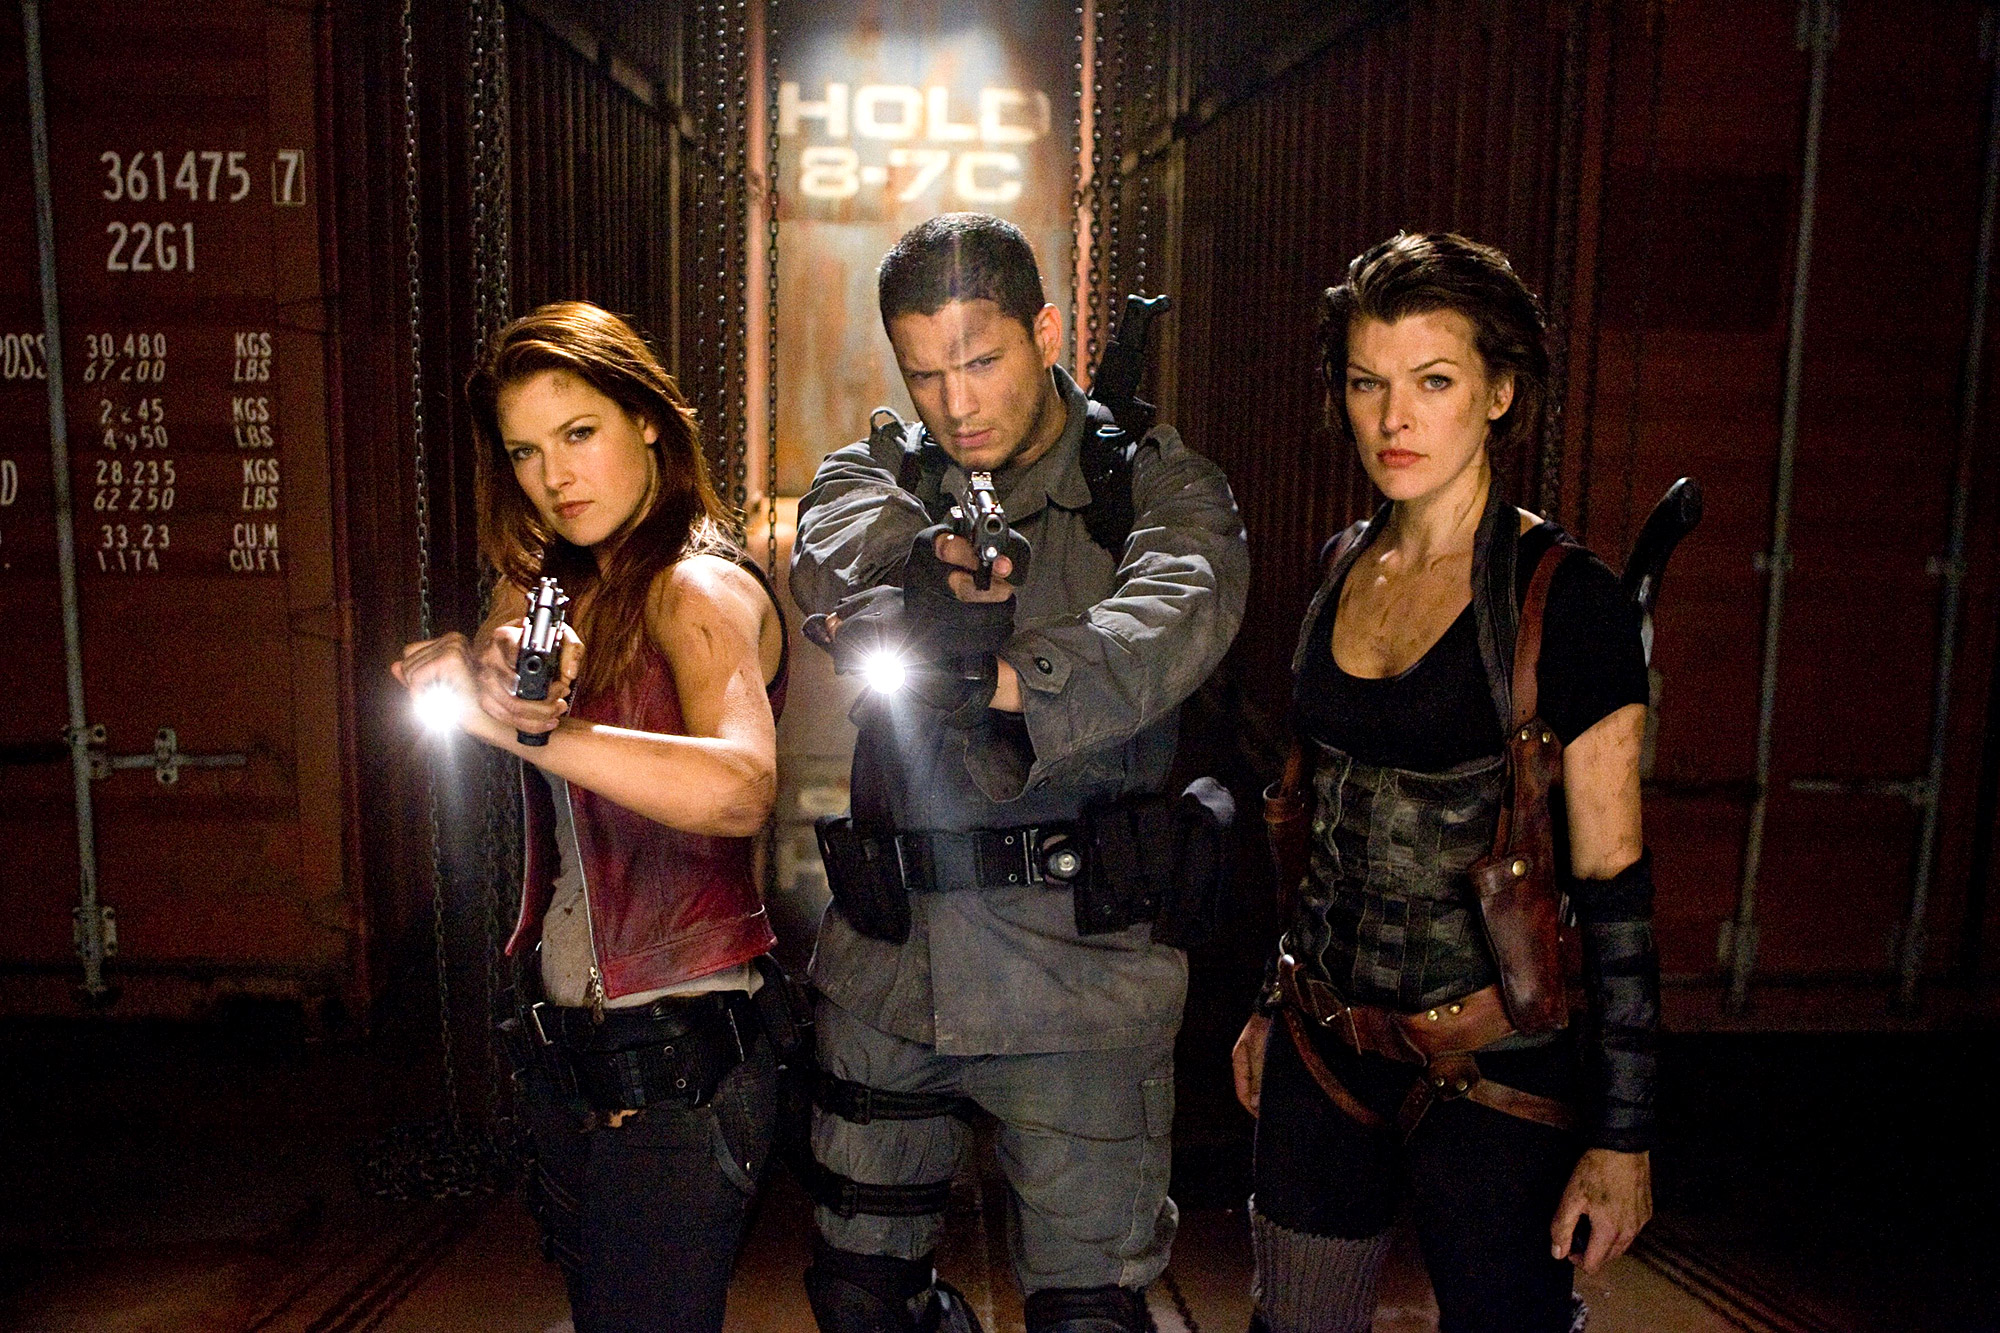 Your guide to watching all 'Resident Evil' movies and TV shows in order